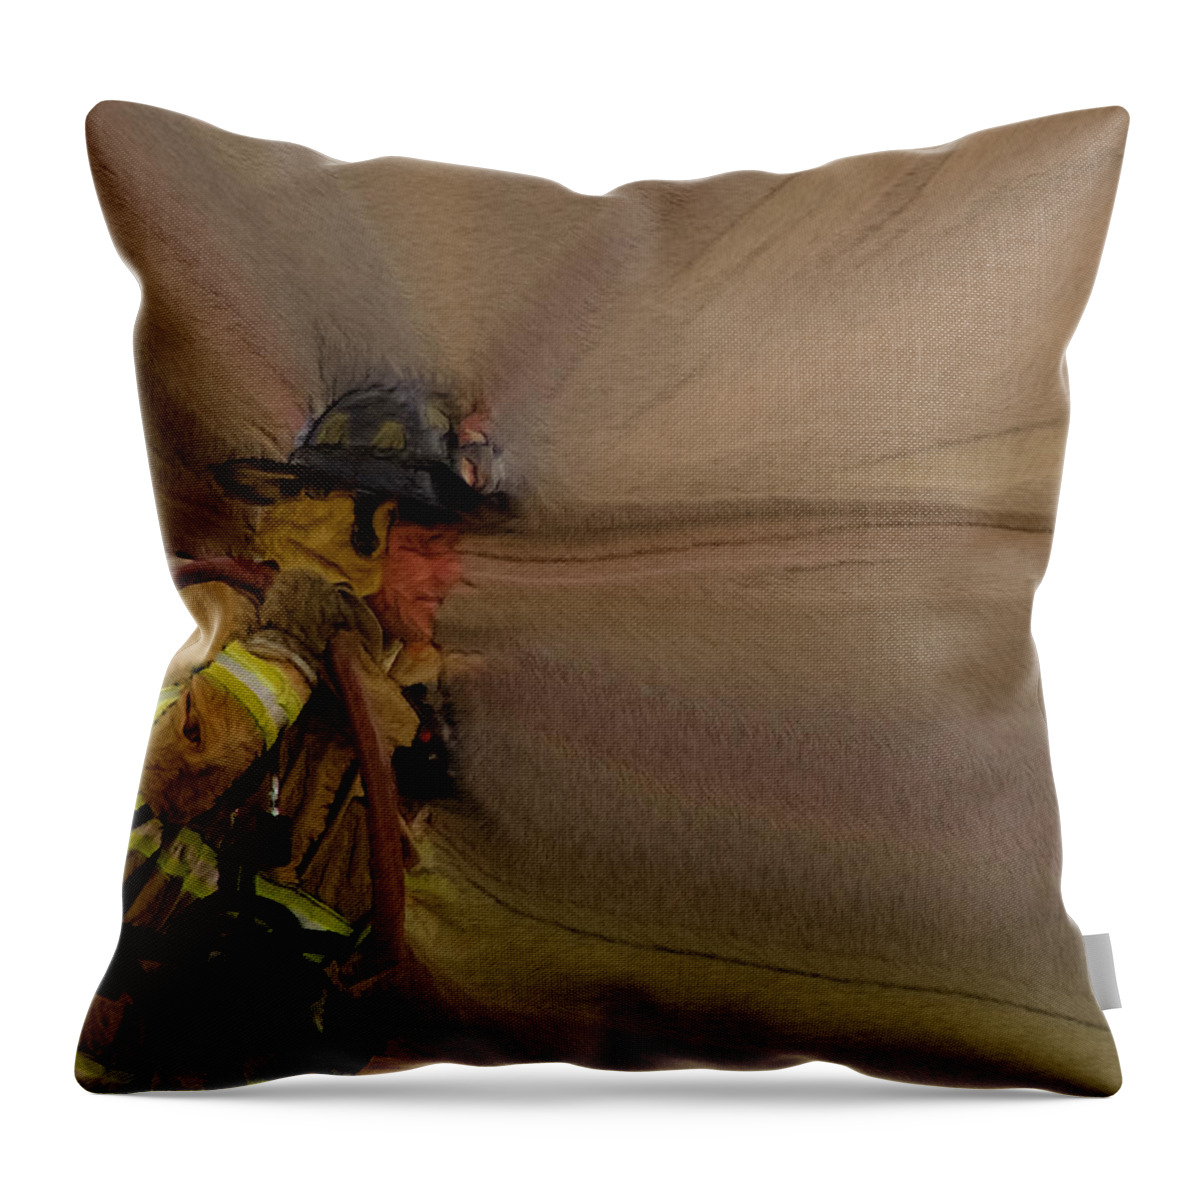 Firefighters Throw Pillow featuring the digital art Haulin Hose by Ernest Echols